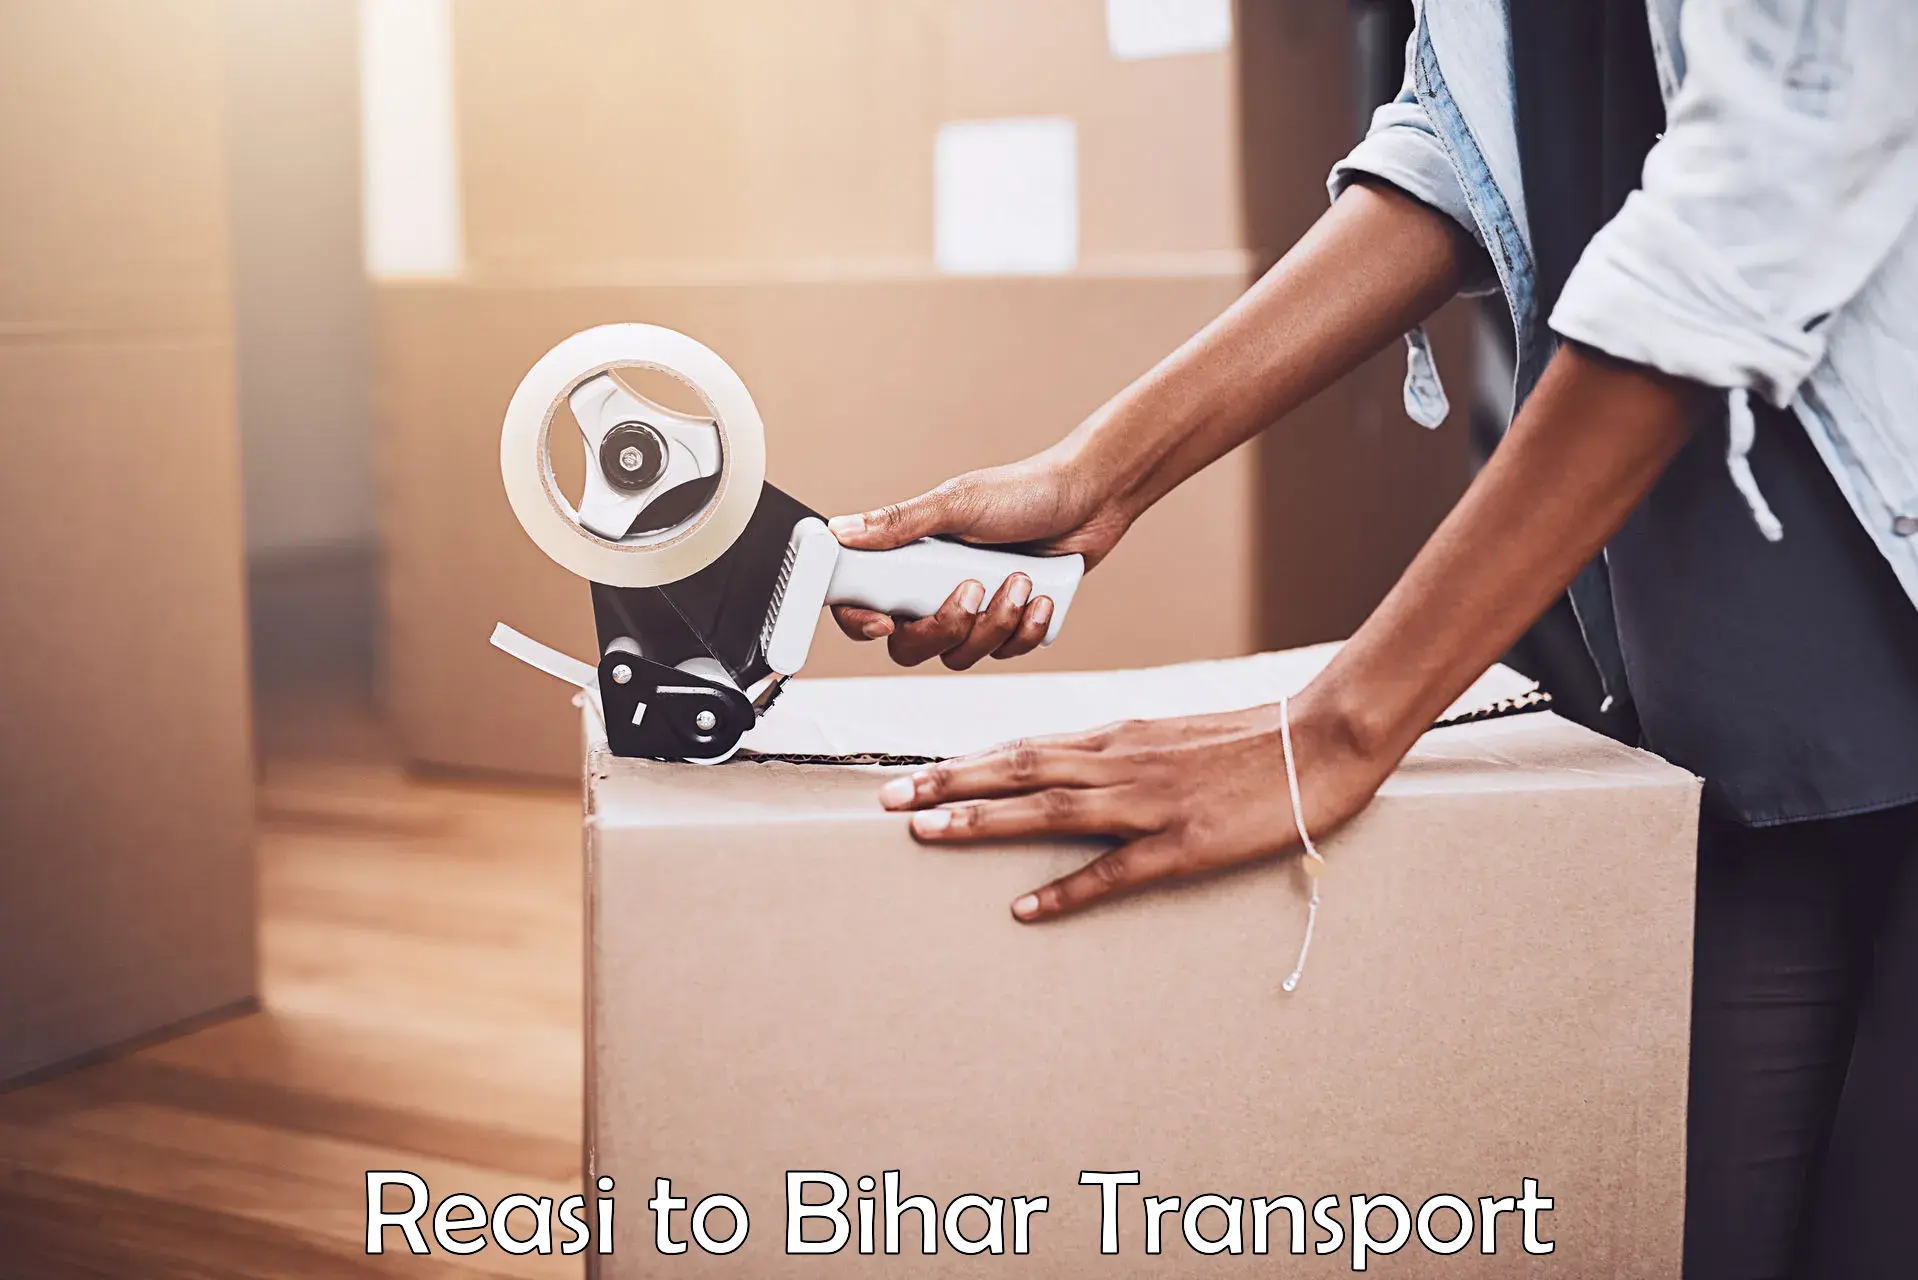 Commercial transport service Reasi to Begusarai